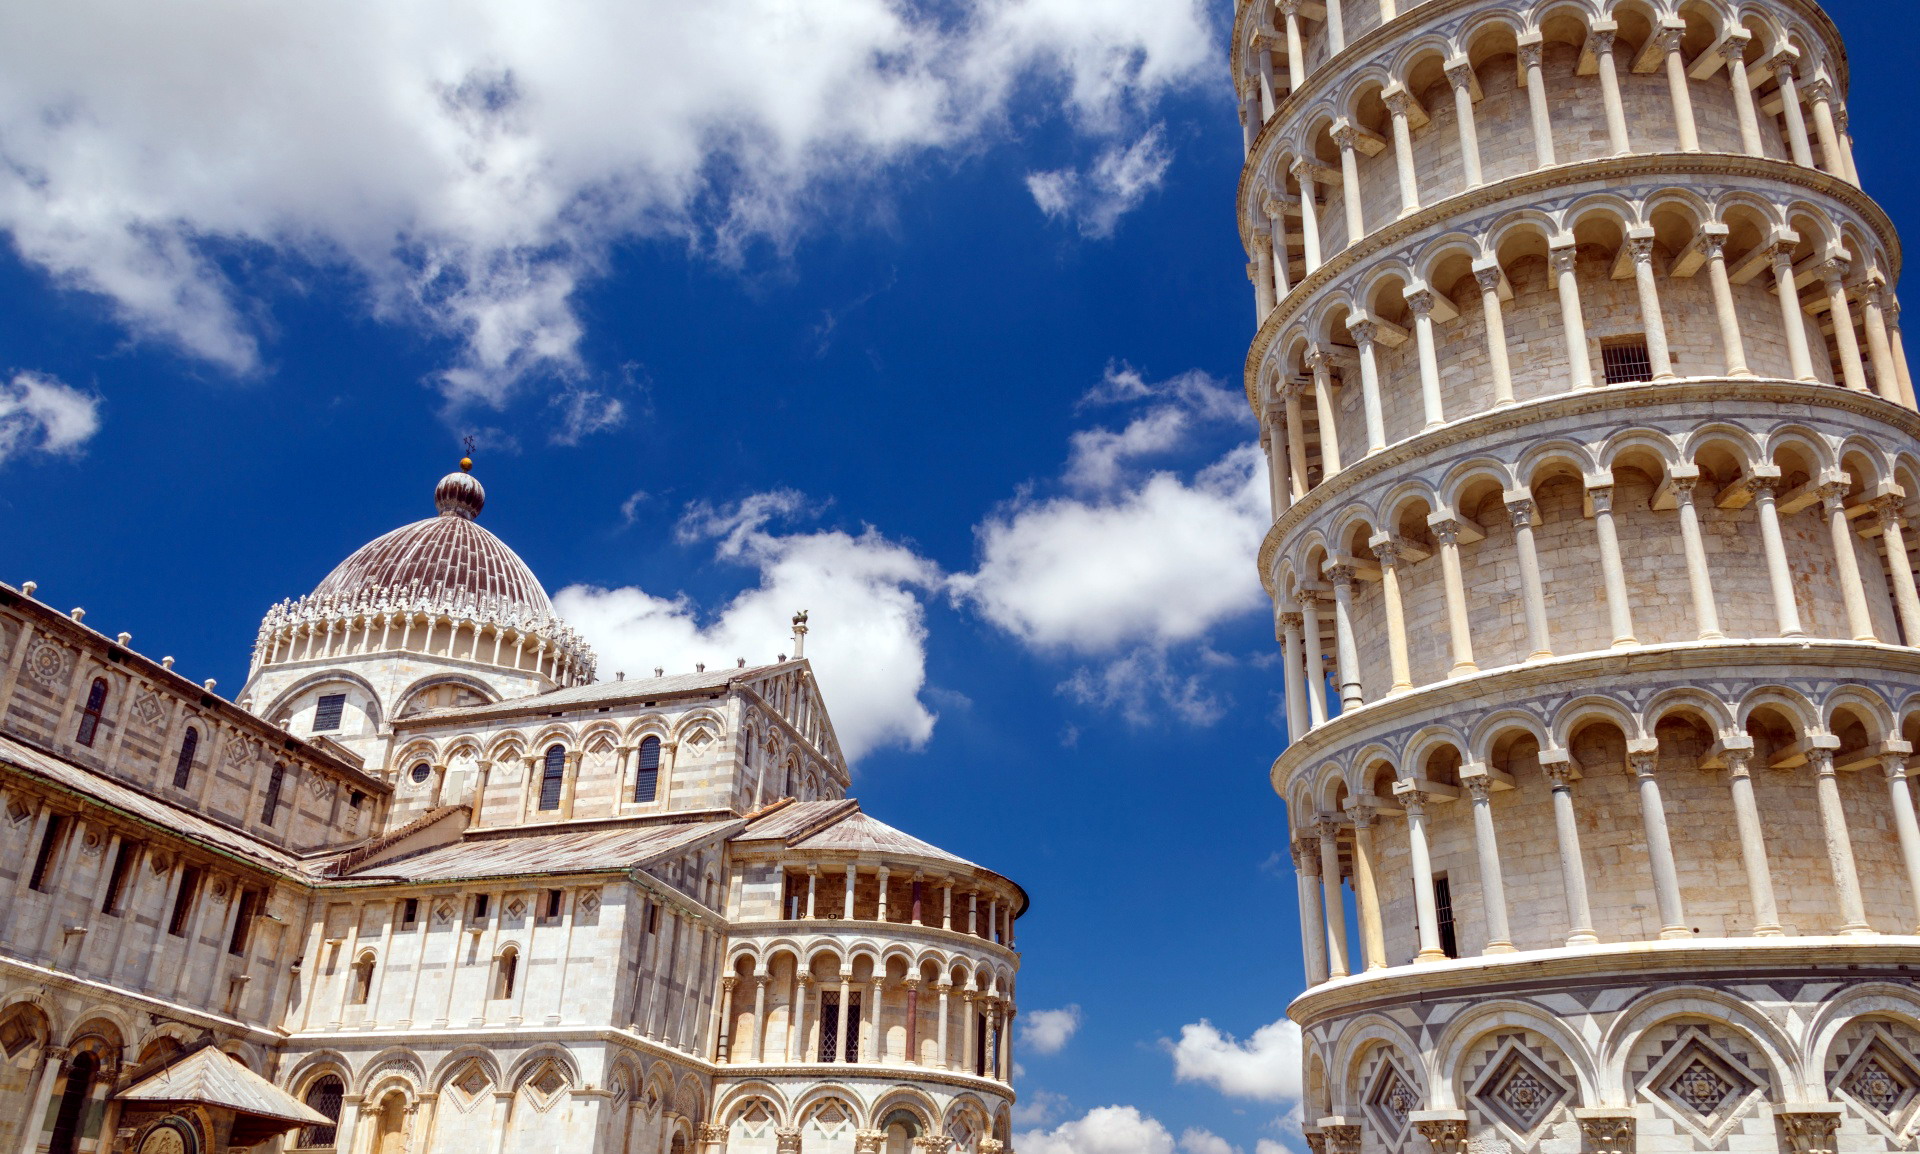 Man Made Leaning Tower Of Pisa HD Wallpaper | Background Image